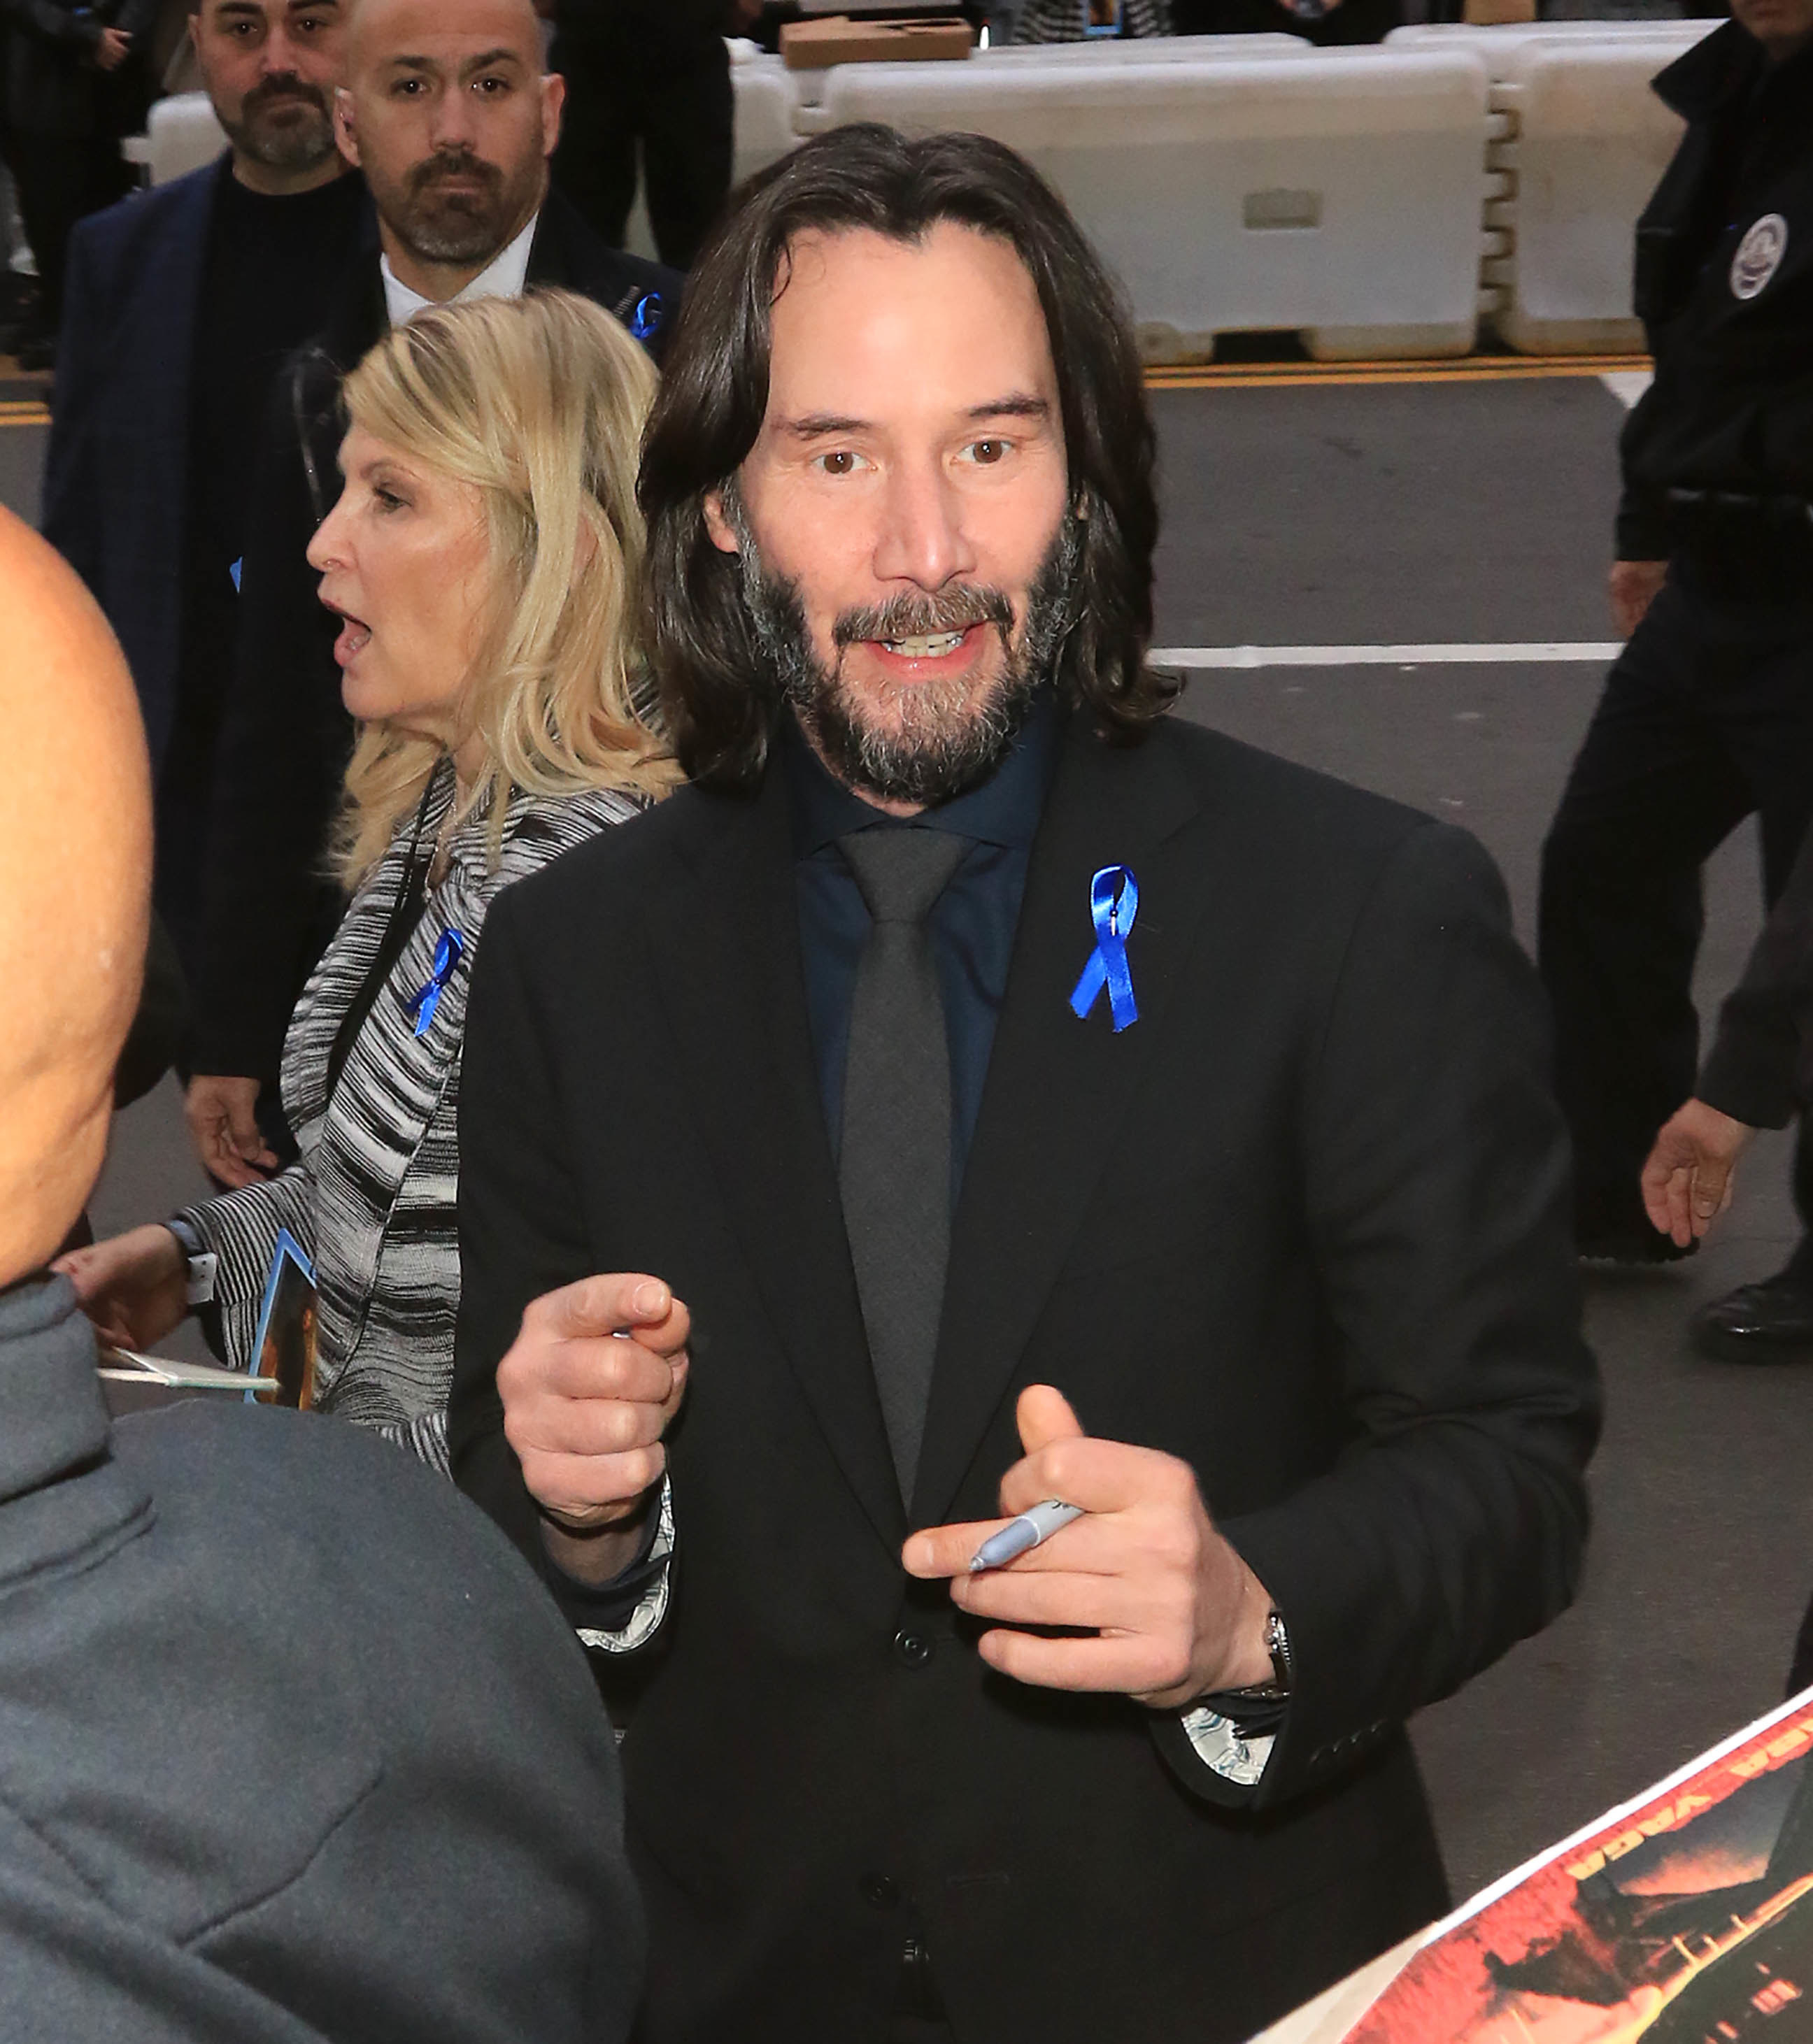 Keanu Reeves Meets Young Fan At Book Signing